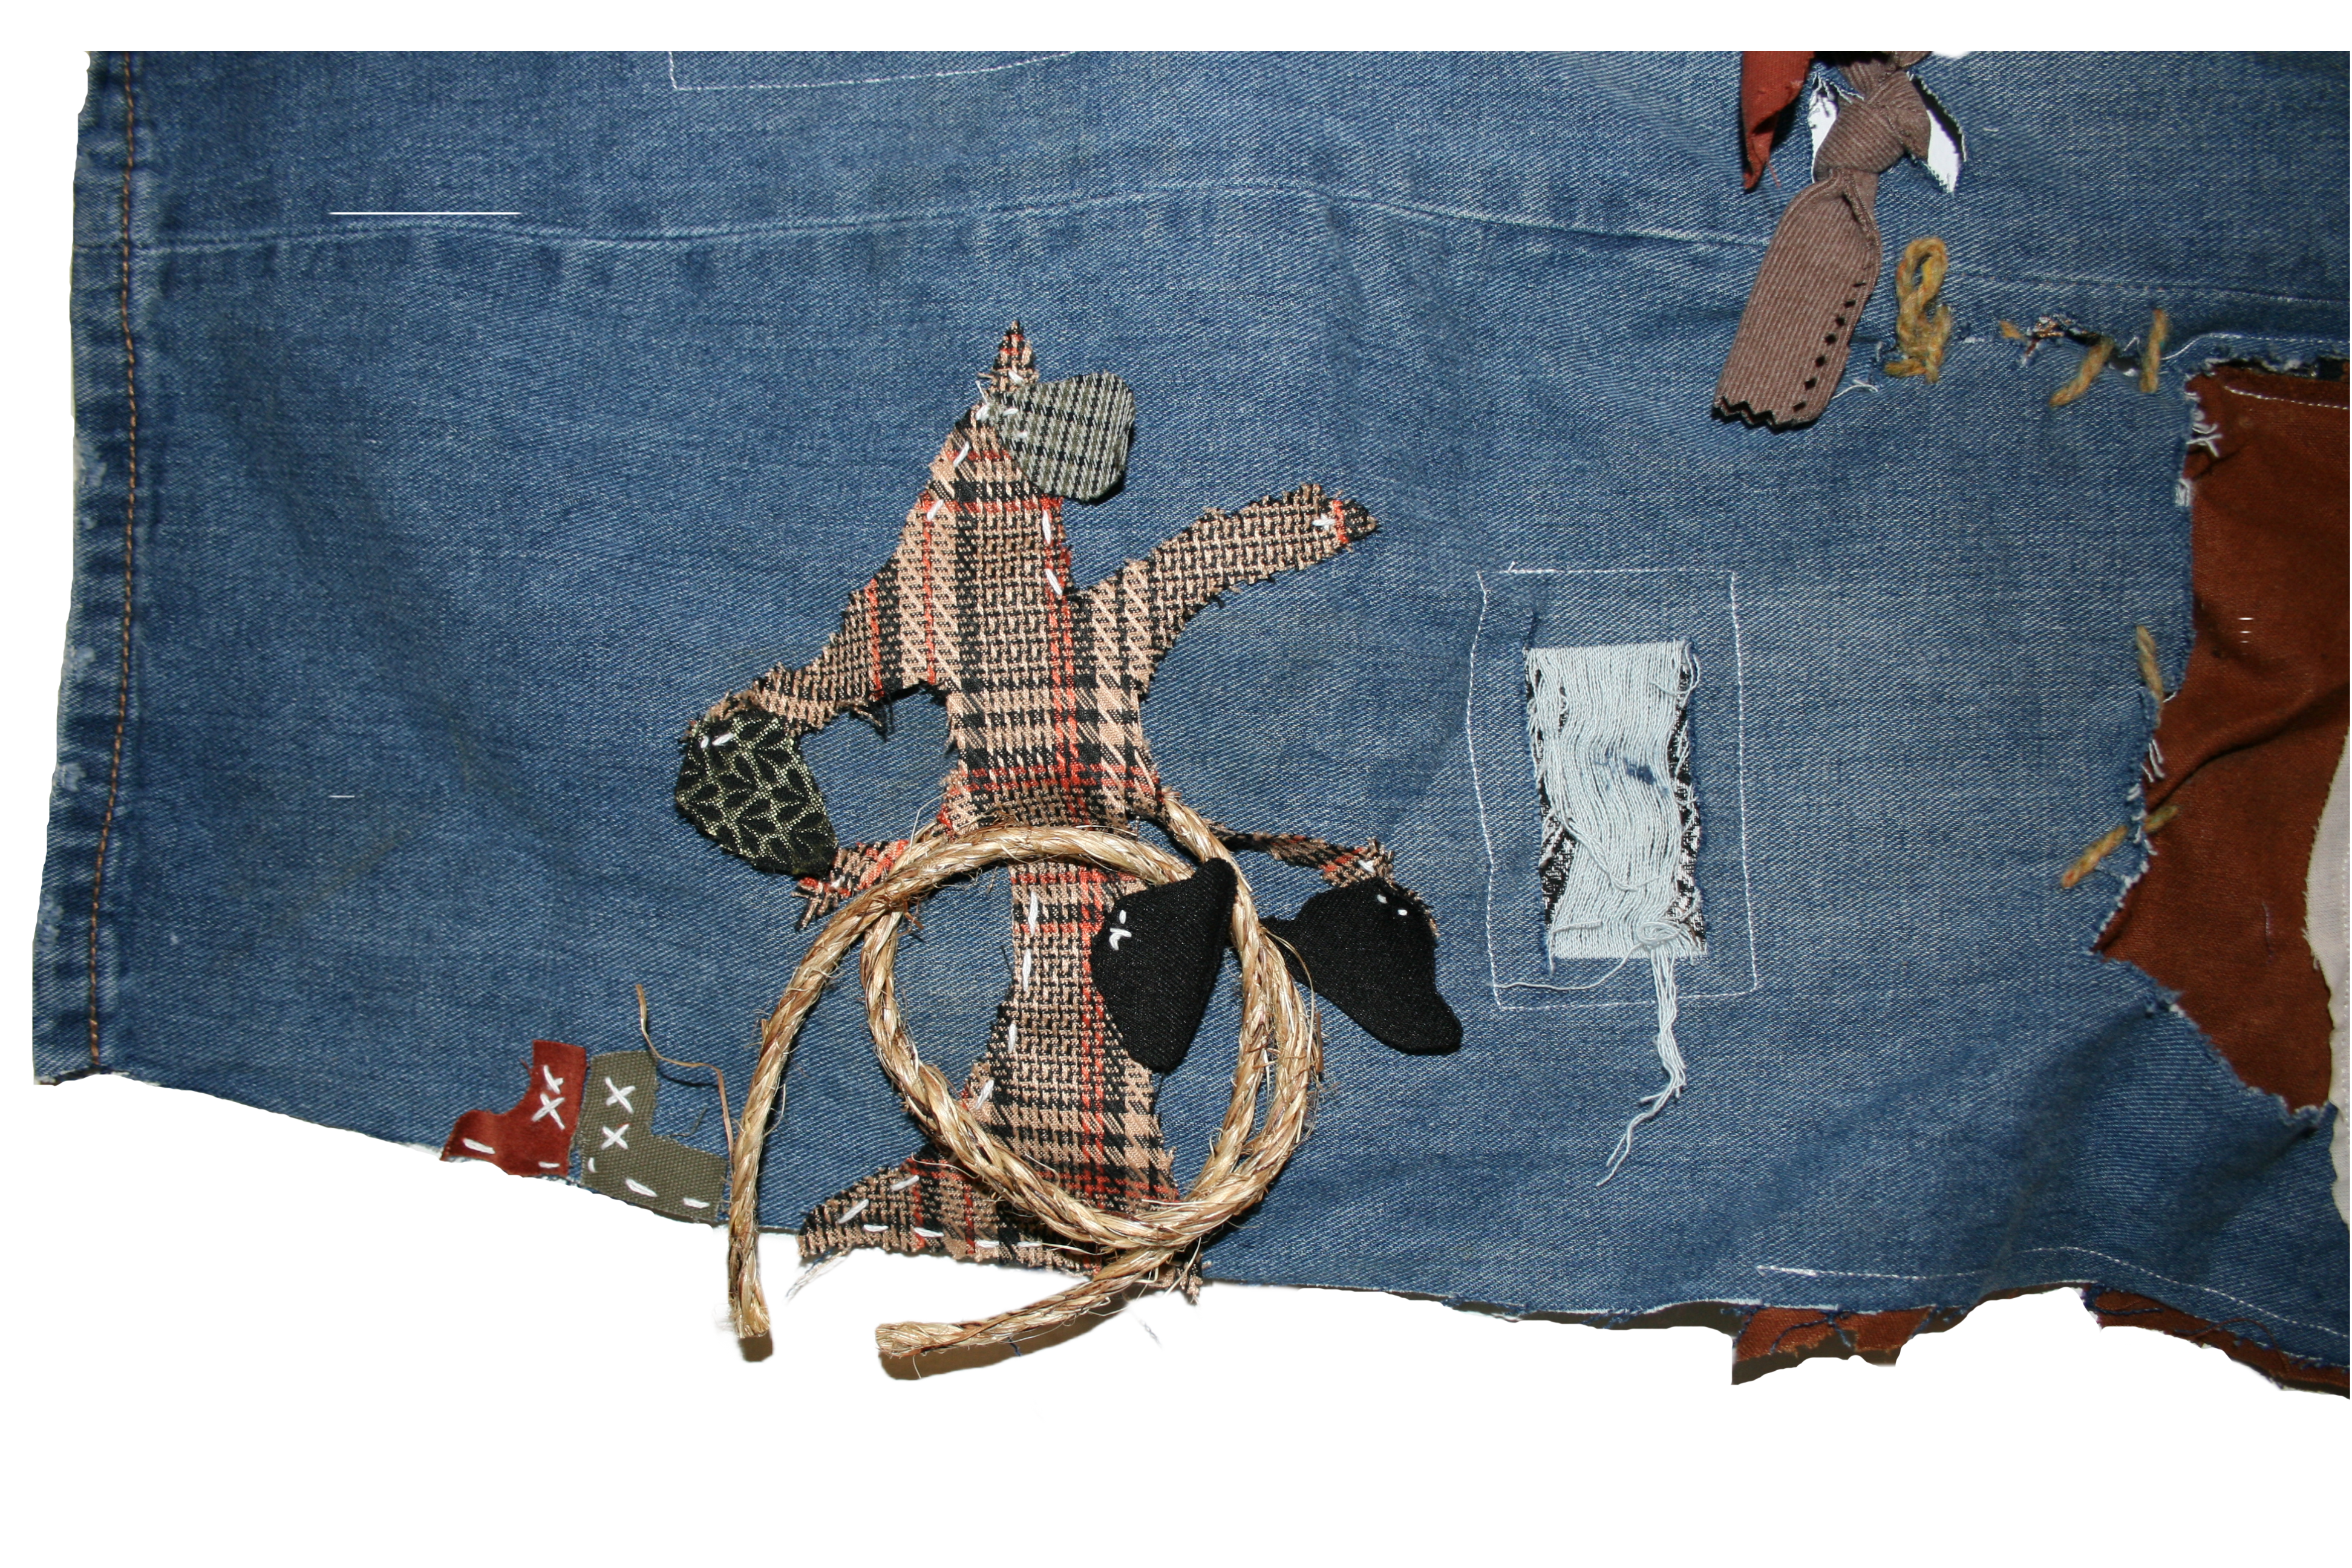 Close up photo of the bottom left corner of the piece. There is a tree made of brown patterned fabric sewn onto the denim. The tree has two black hats, two green leaves, and a brown rope hanging from it. There is a pair of mismatched boots sewn to the left side of the tree and a rectangle of distressed denim to the right side.
